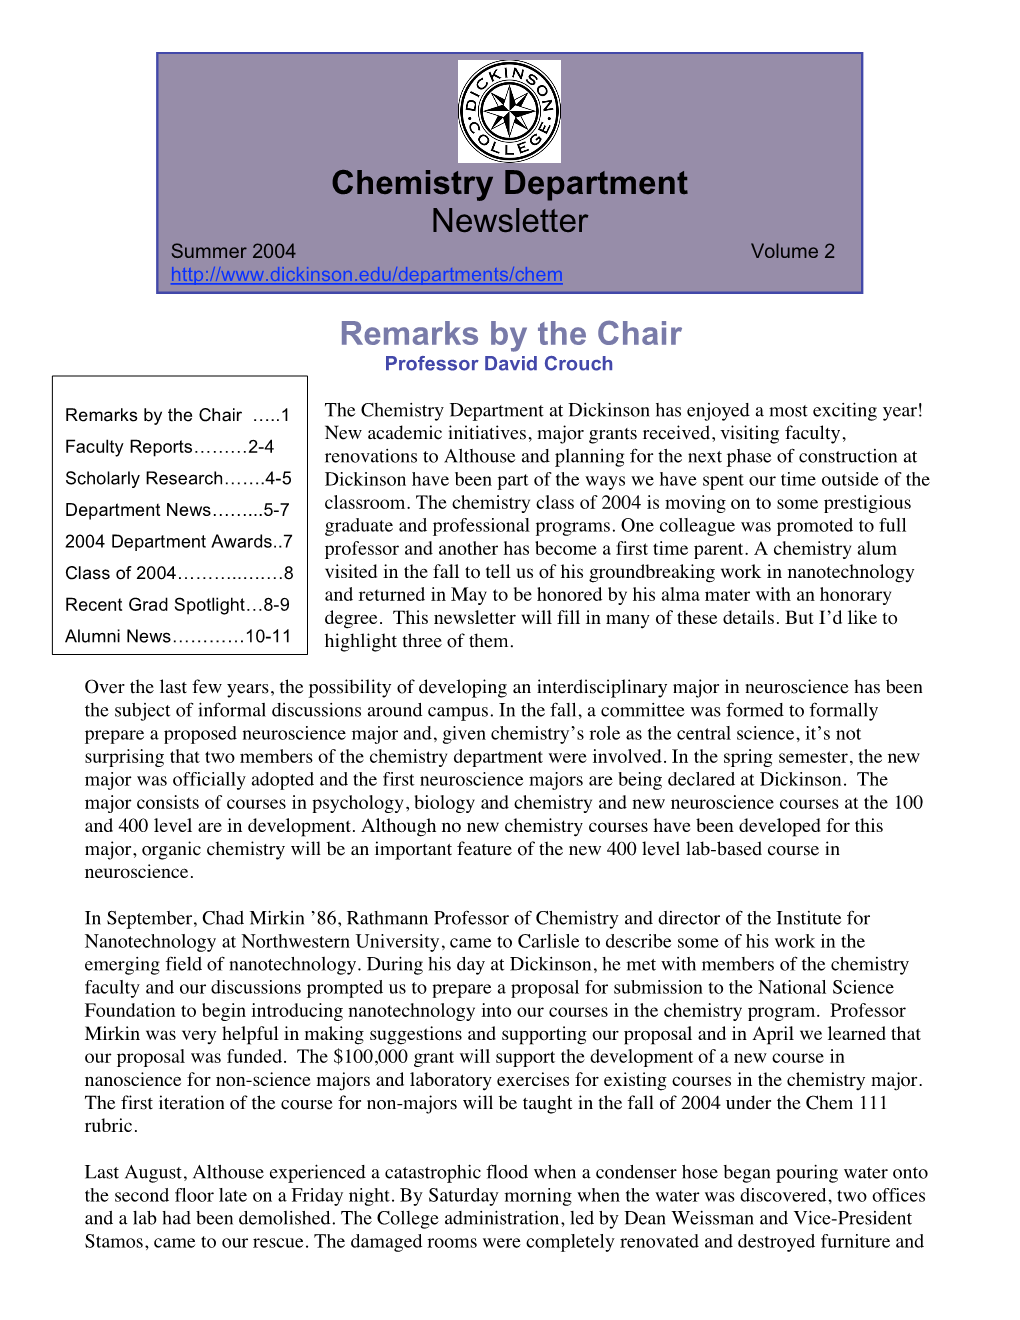 Remarks by the Chair Chemistry Department